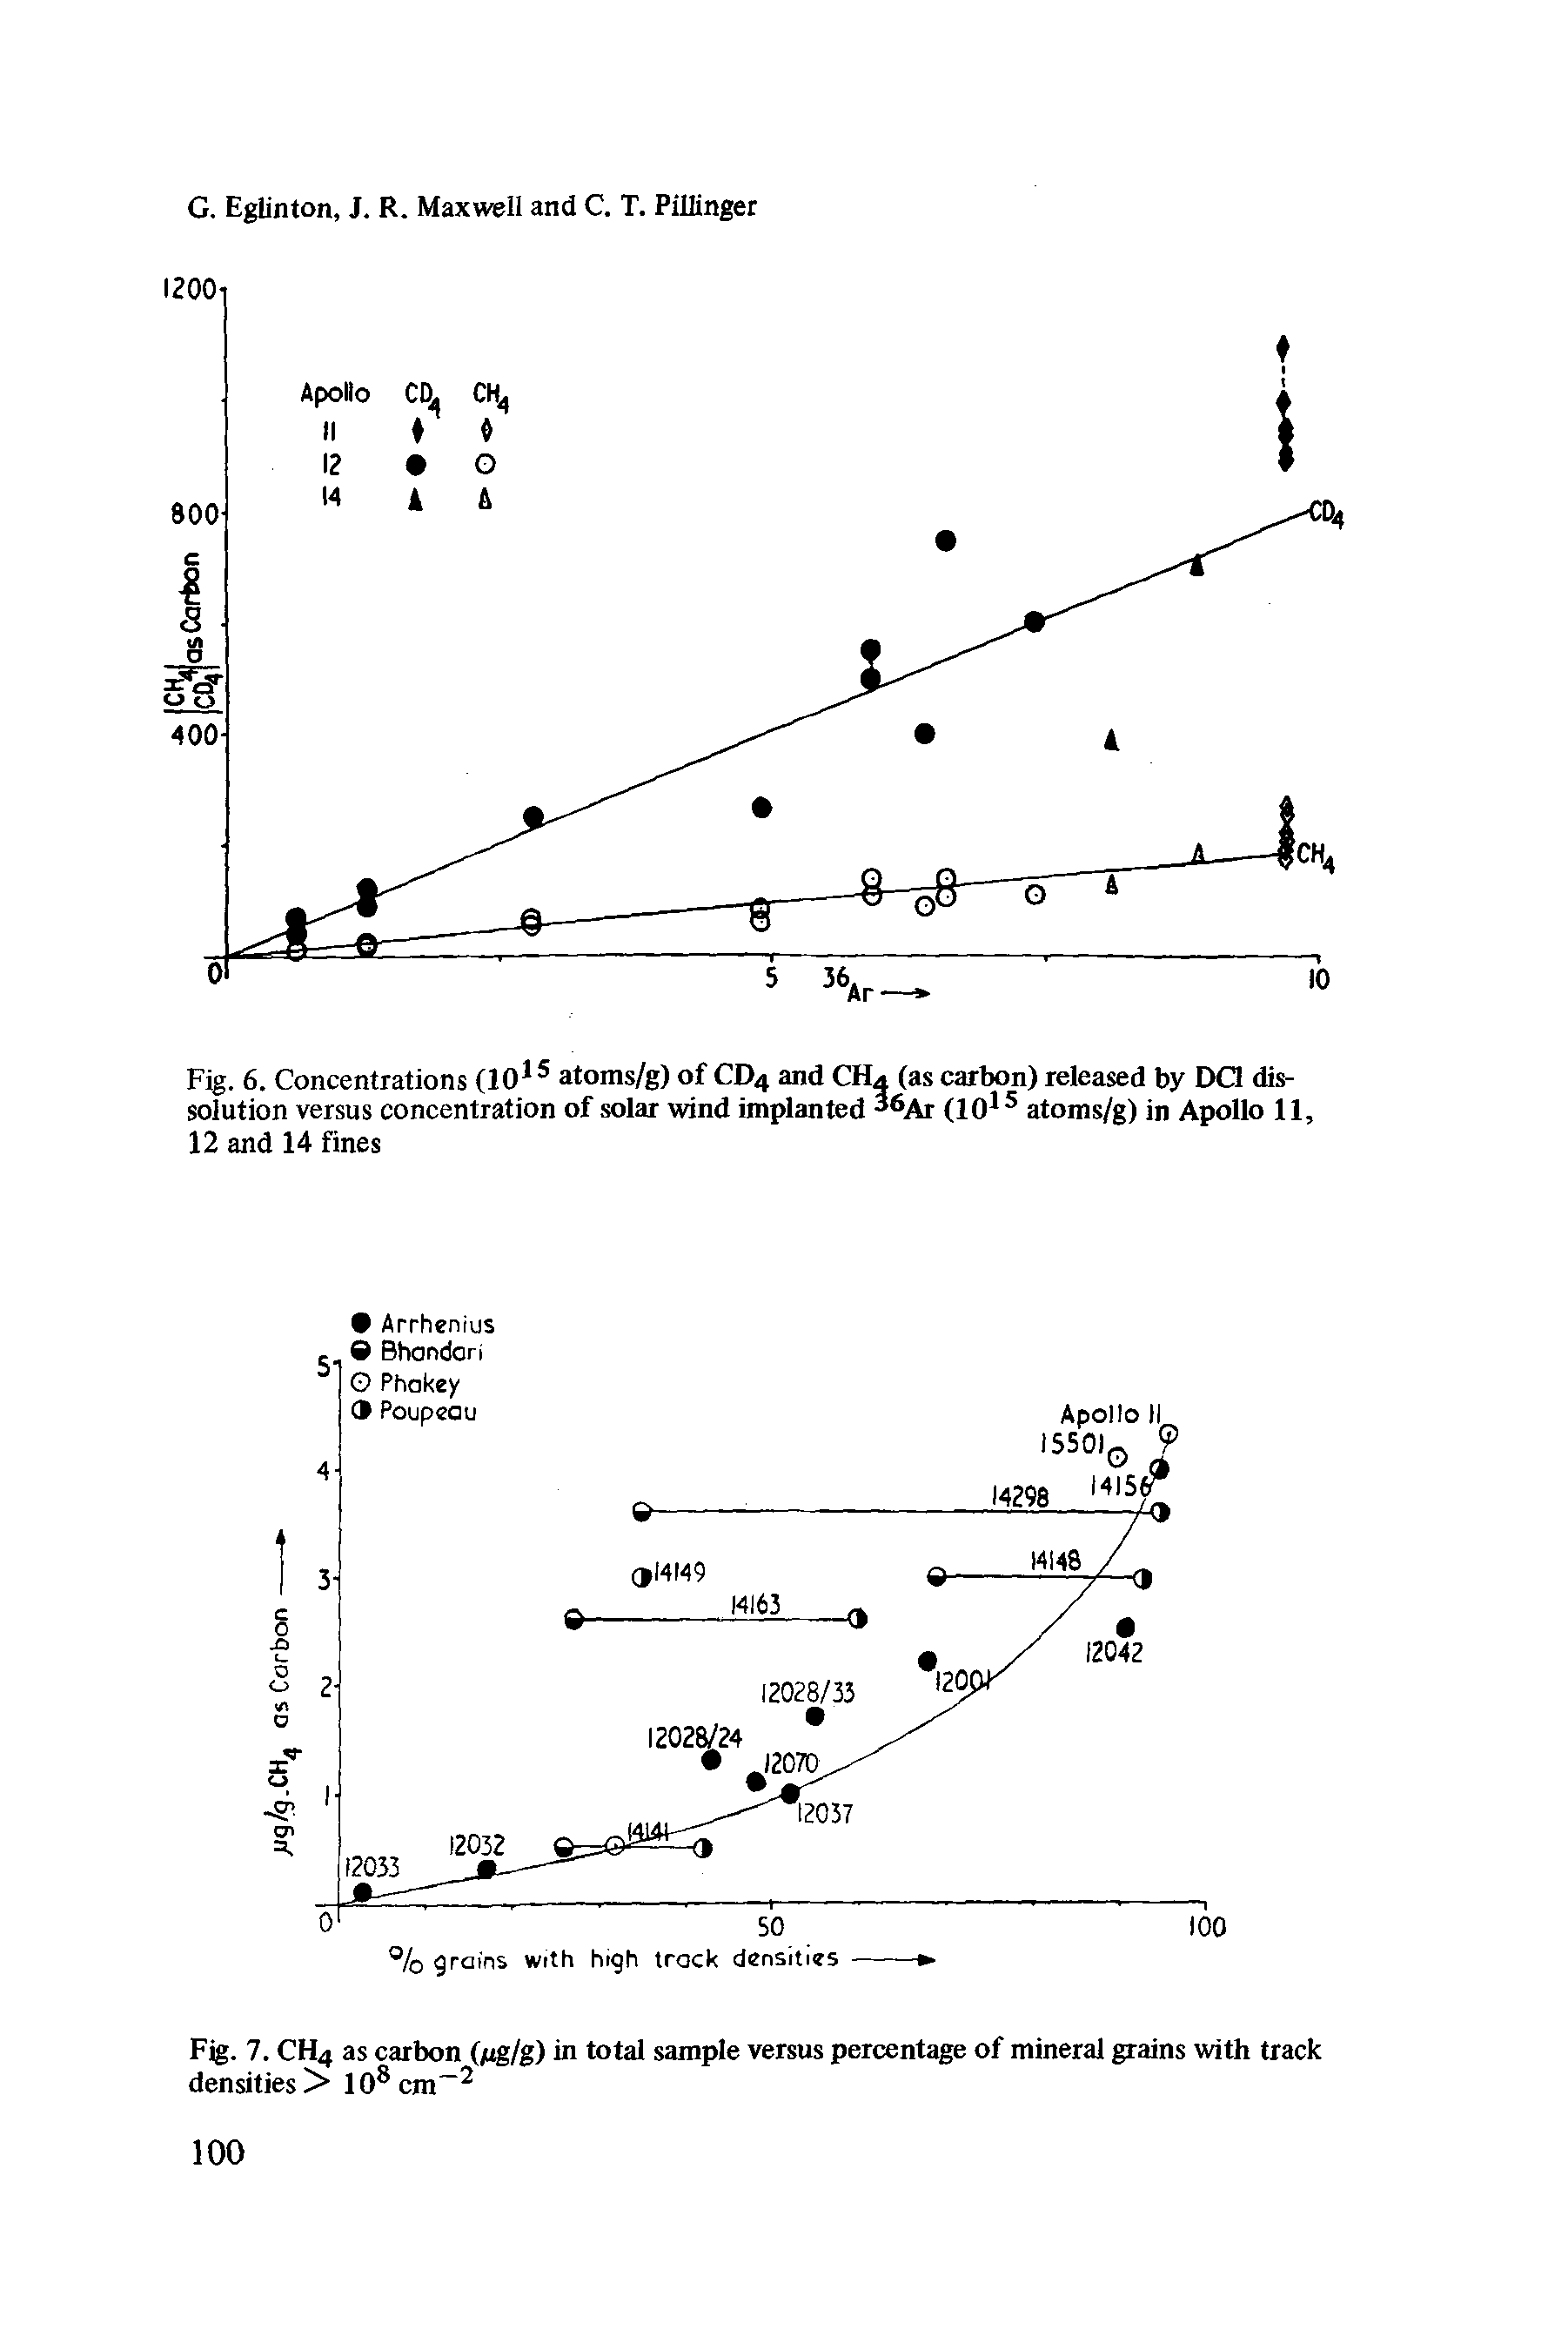 Fig. 6. Concentrations (10ls atoms/g) of CD4 and CH4 (as carbon) released by DQ dissolution versus concentration of solar wind implanted 26Ar (1015 atoms/g) in Apollo 11, 12 and 14 fines...